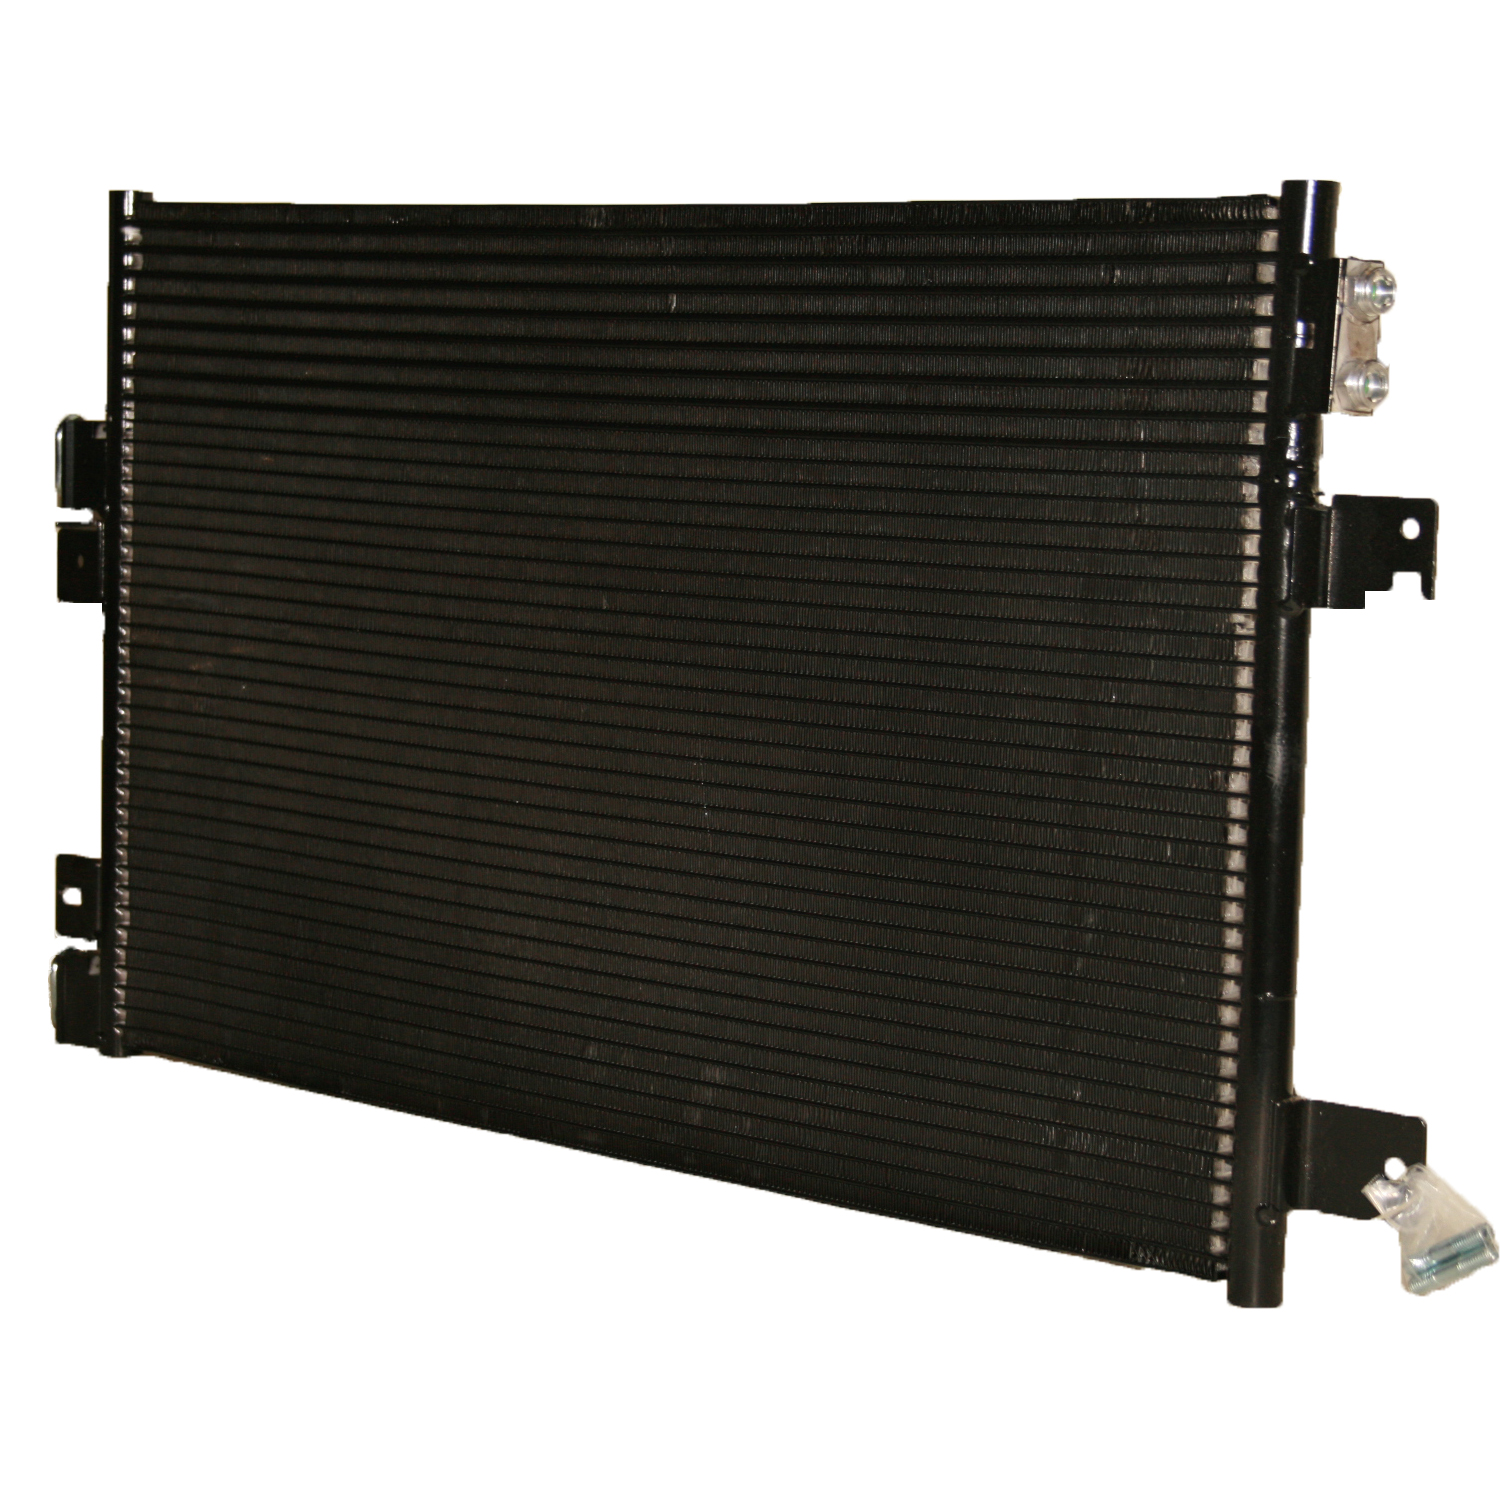 TCW Condenser 44-3586 New Product Image field_60b6a13a6e67c